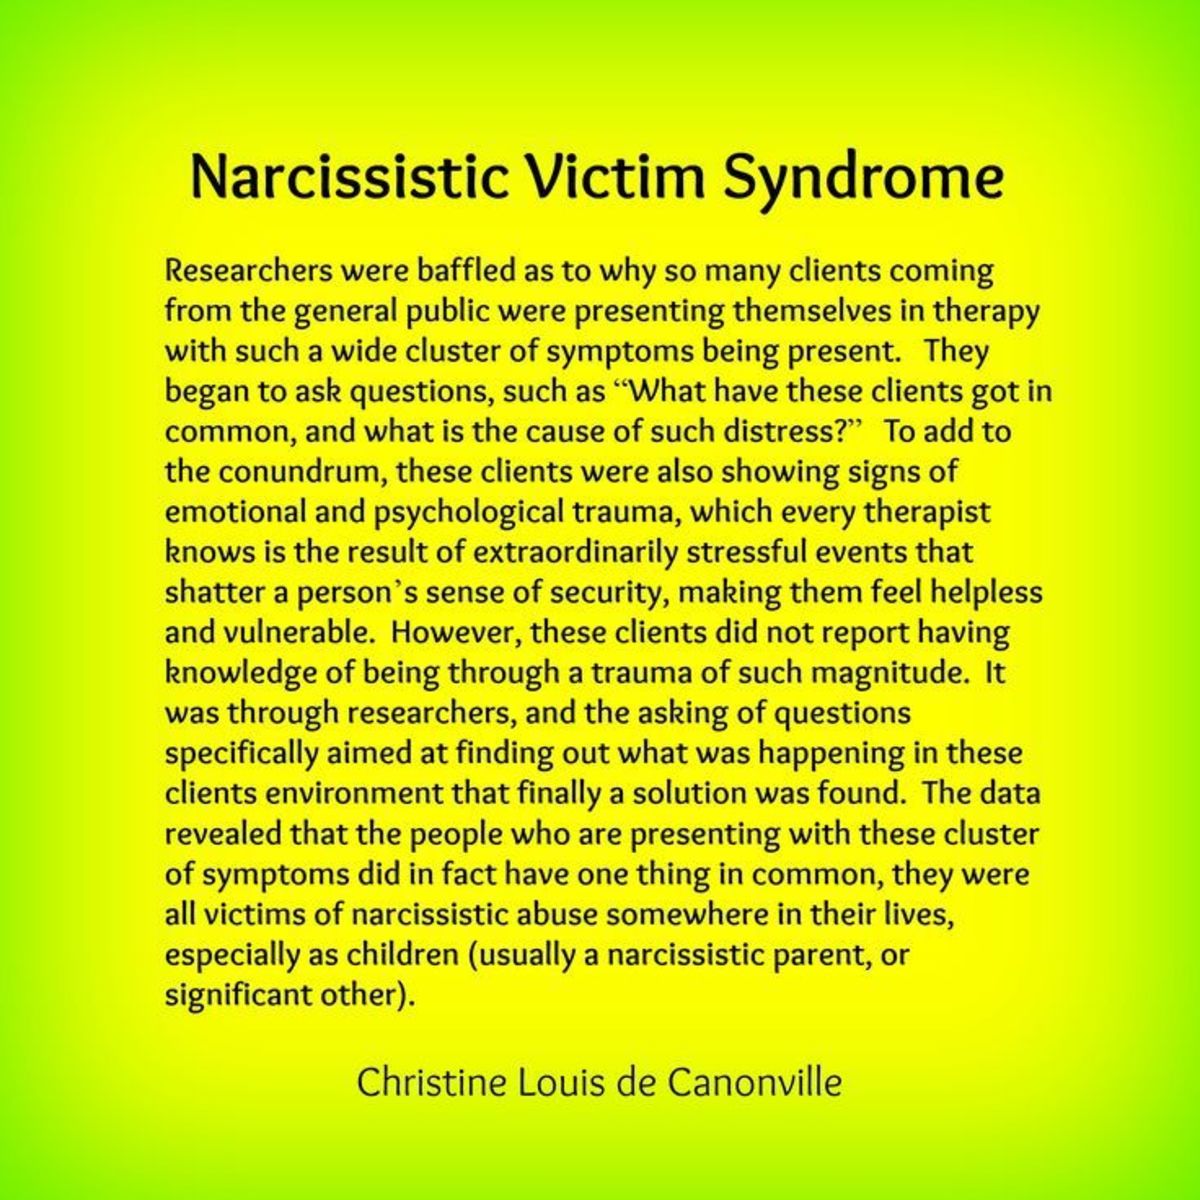 Narcissistic Victim Syndrome Quote by Christine Louie de Canonville of The Roadshow for Therapists and The Three Faces of Evil